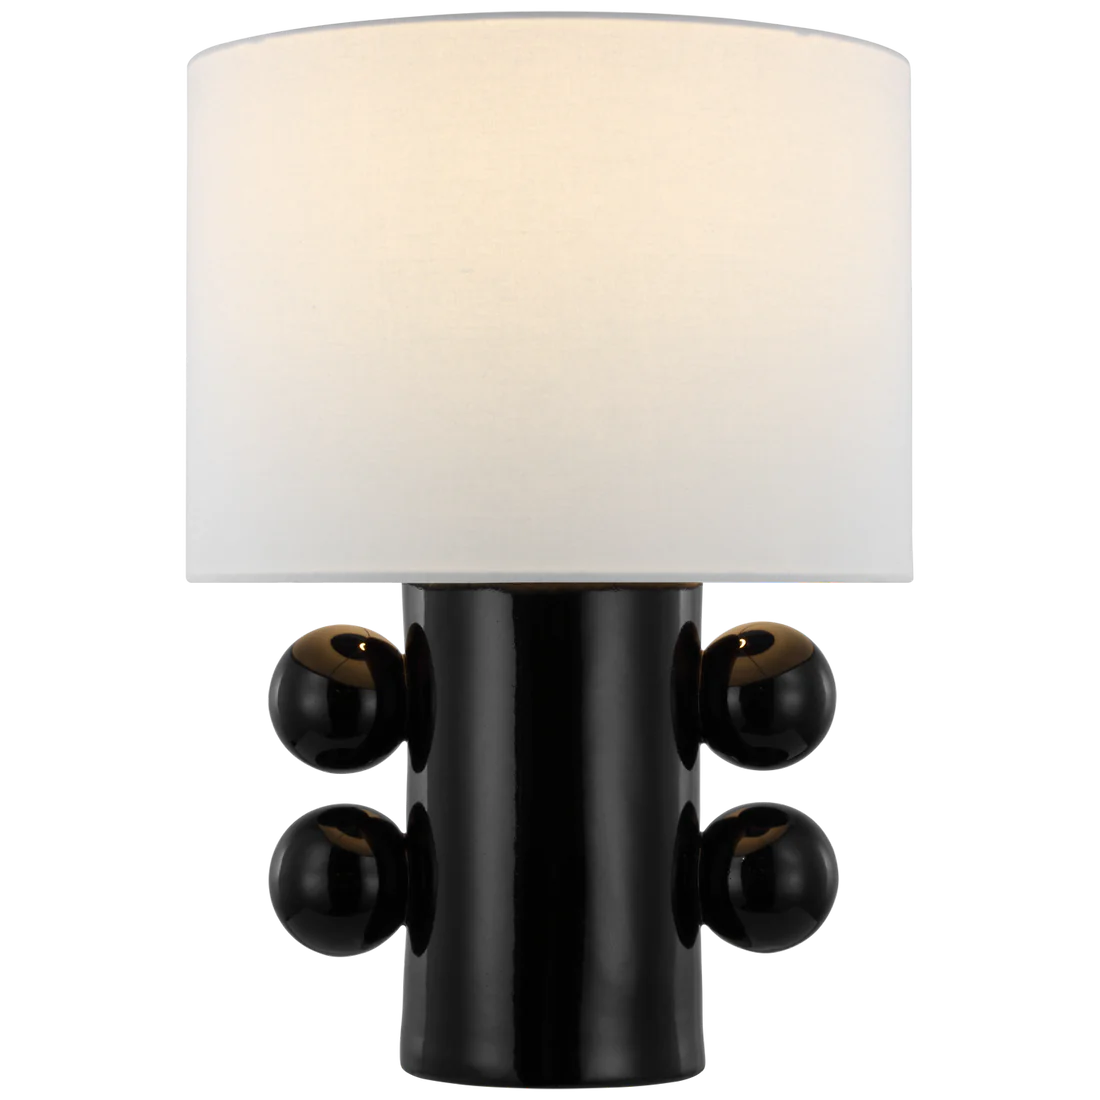 Tiglia table lamp, black base with 4 black orbs dotted on it